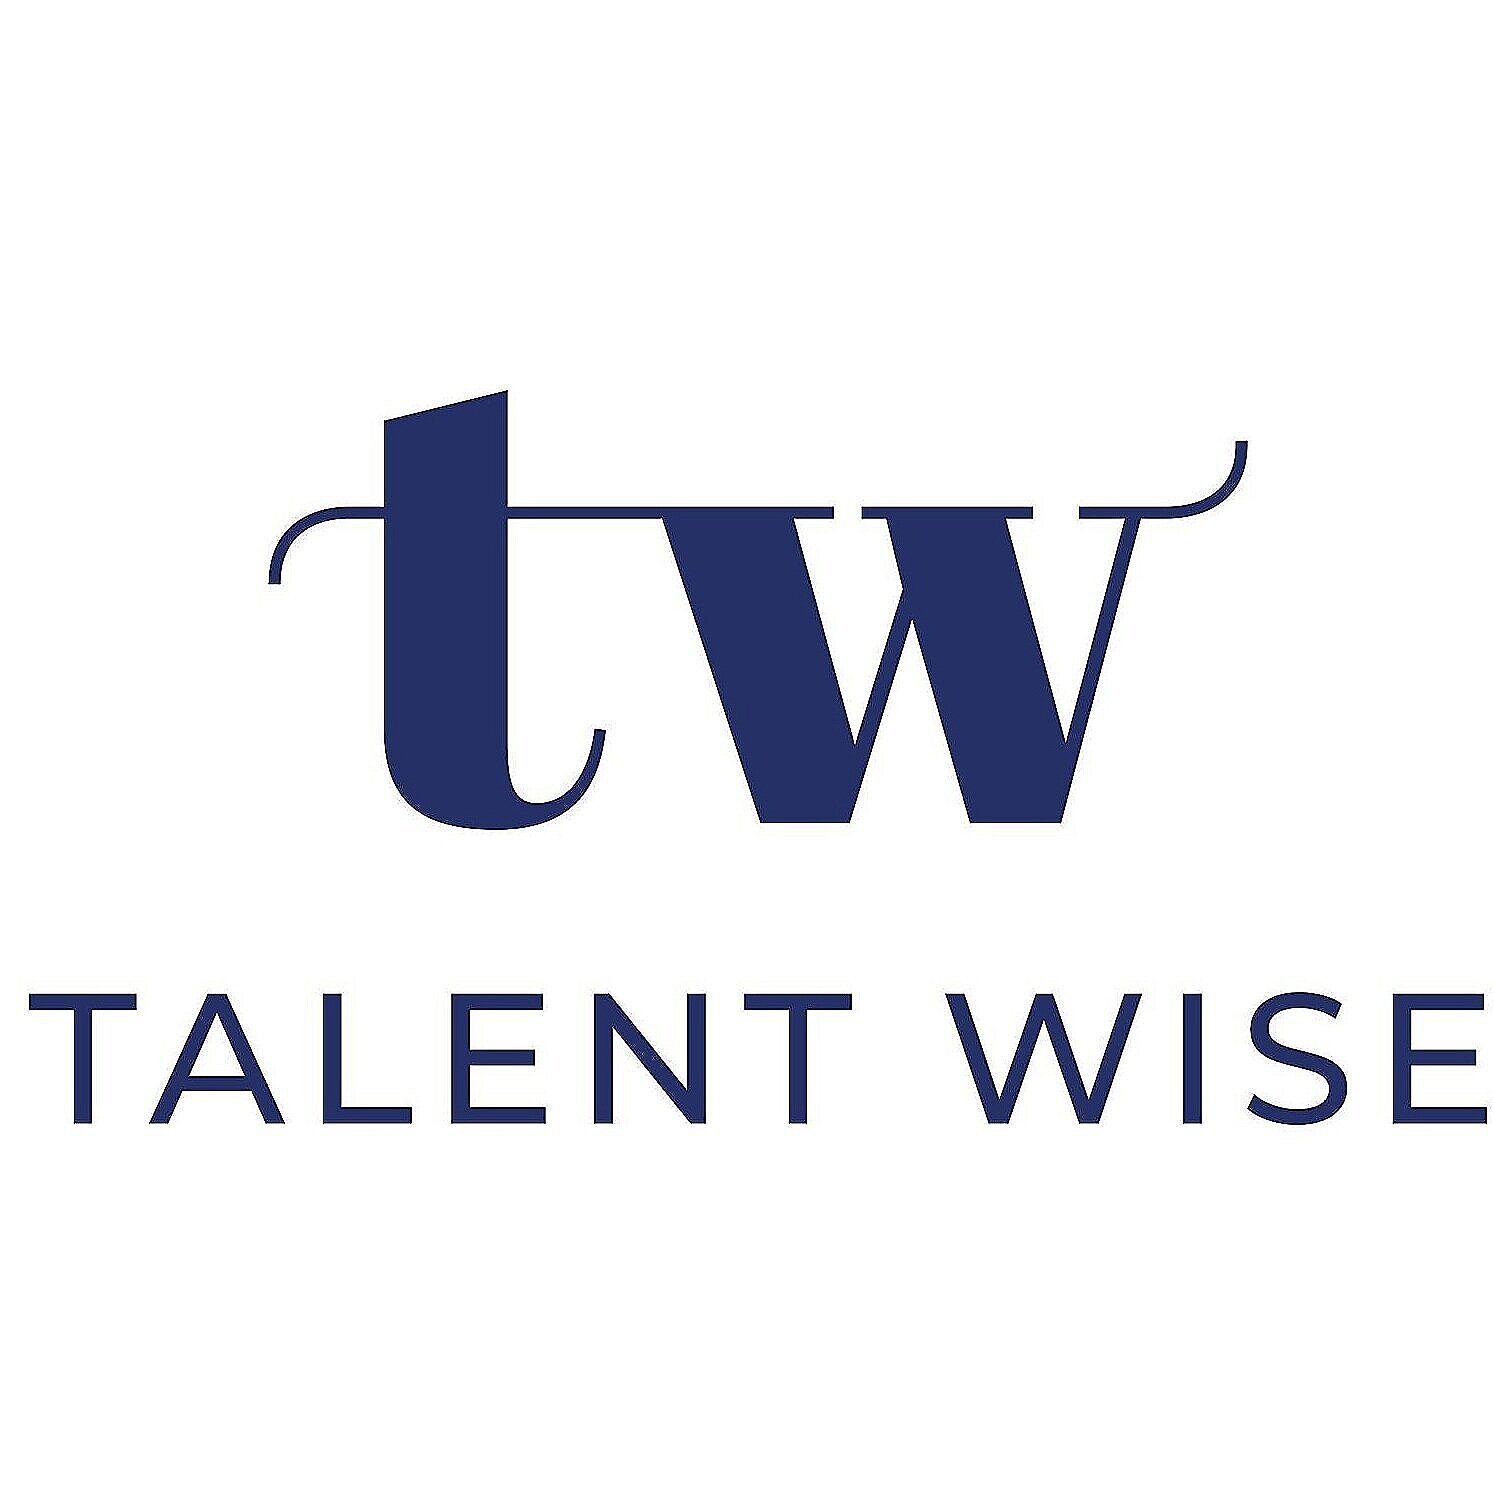 Talent Wise Consulting Ltd